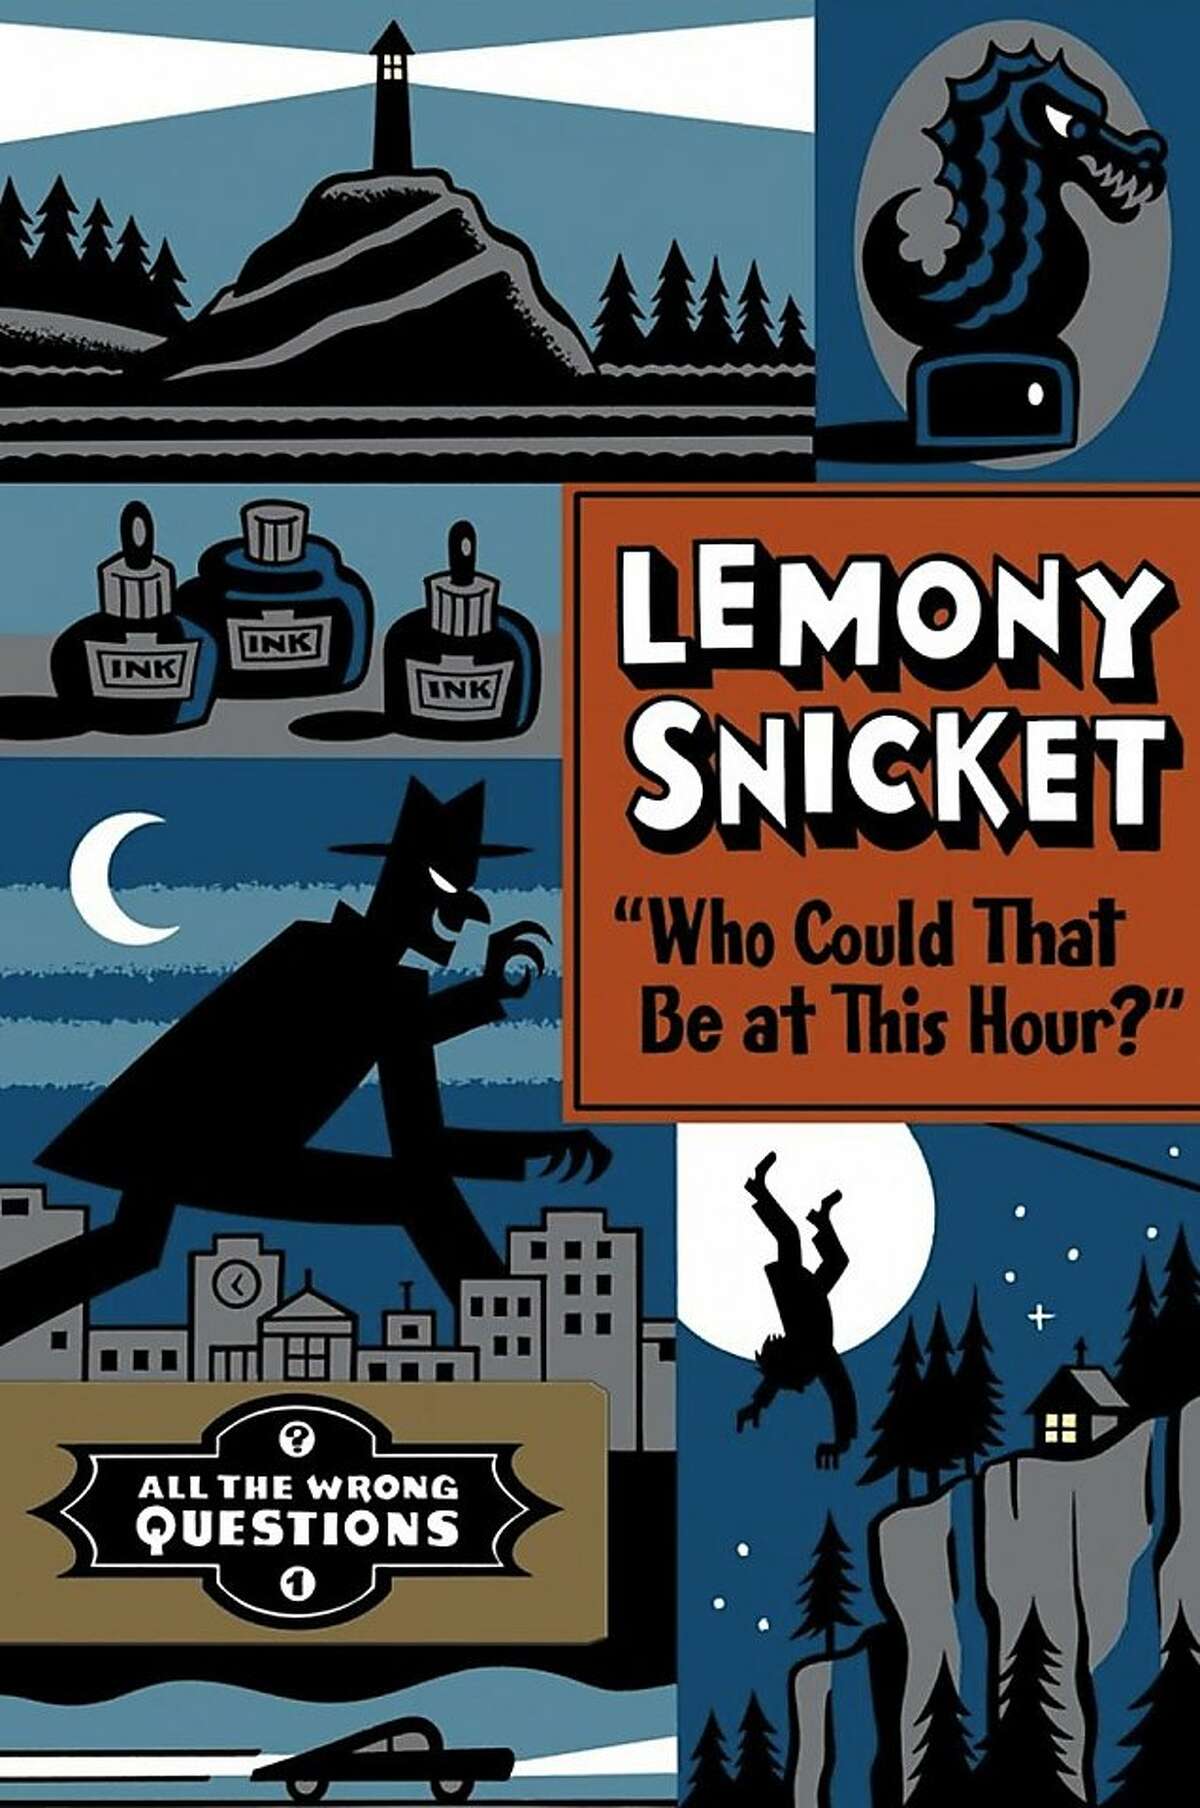 “Who Could That Be at This Hour?” All the Wrong Questions #1, by Lemony Snicket